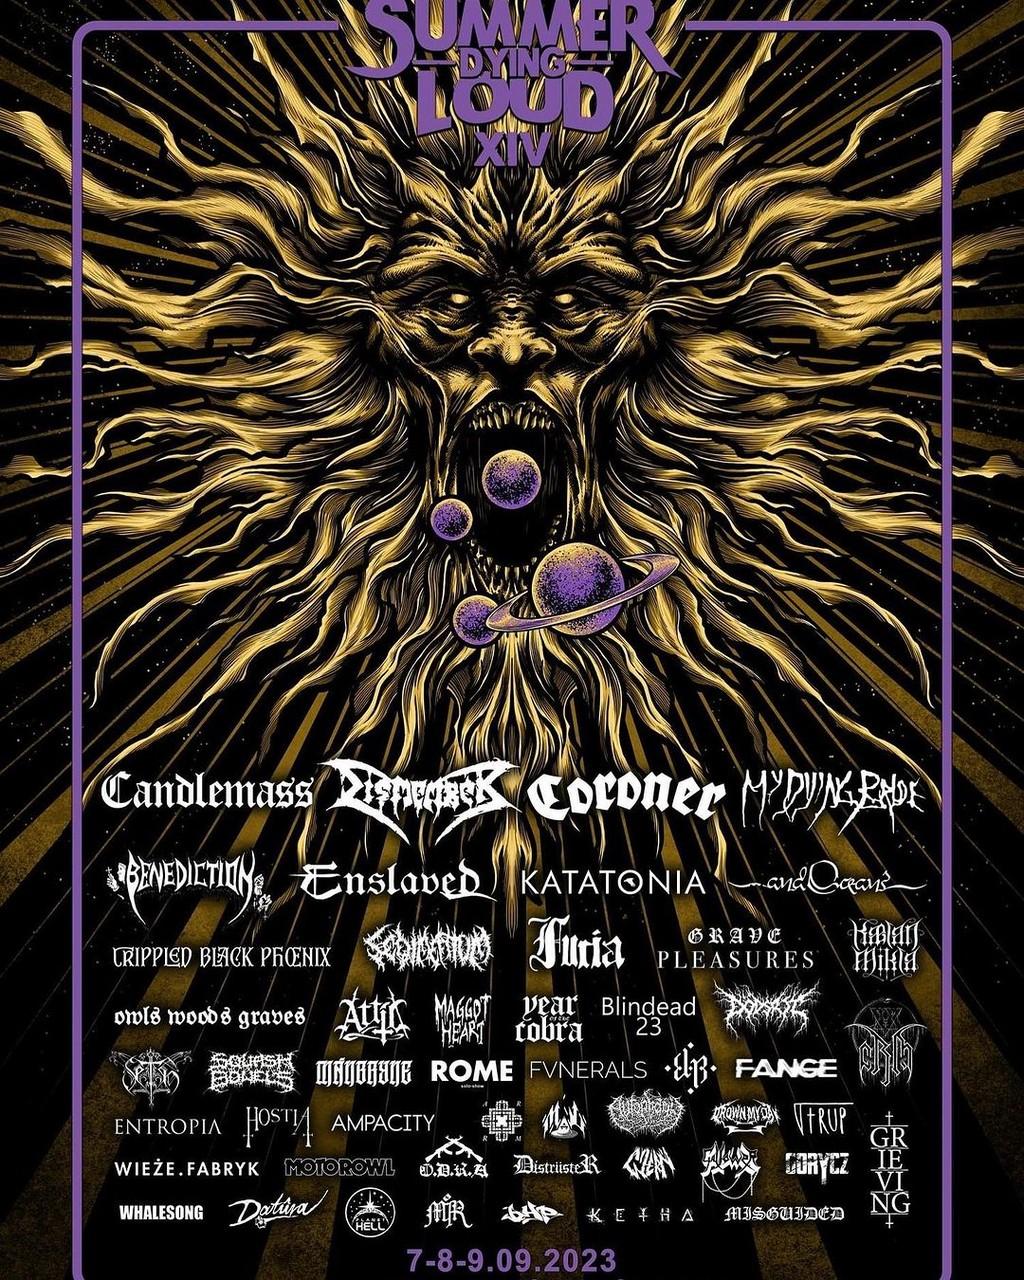 Lineup Poster Summer Dying Loud 2023